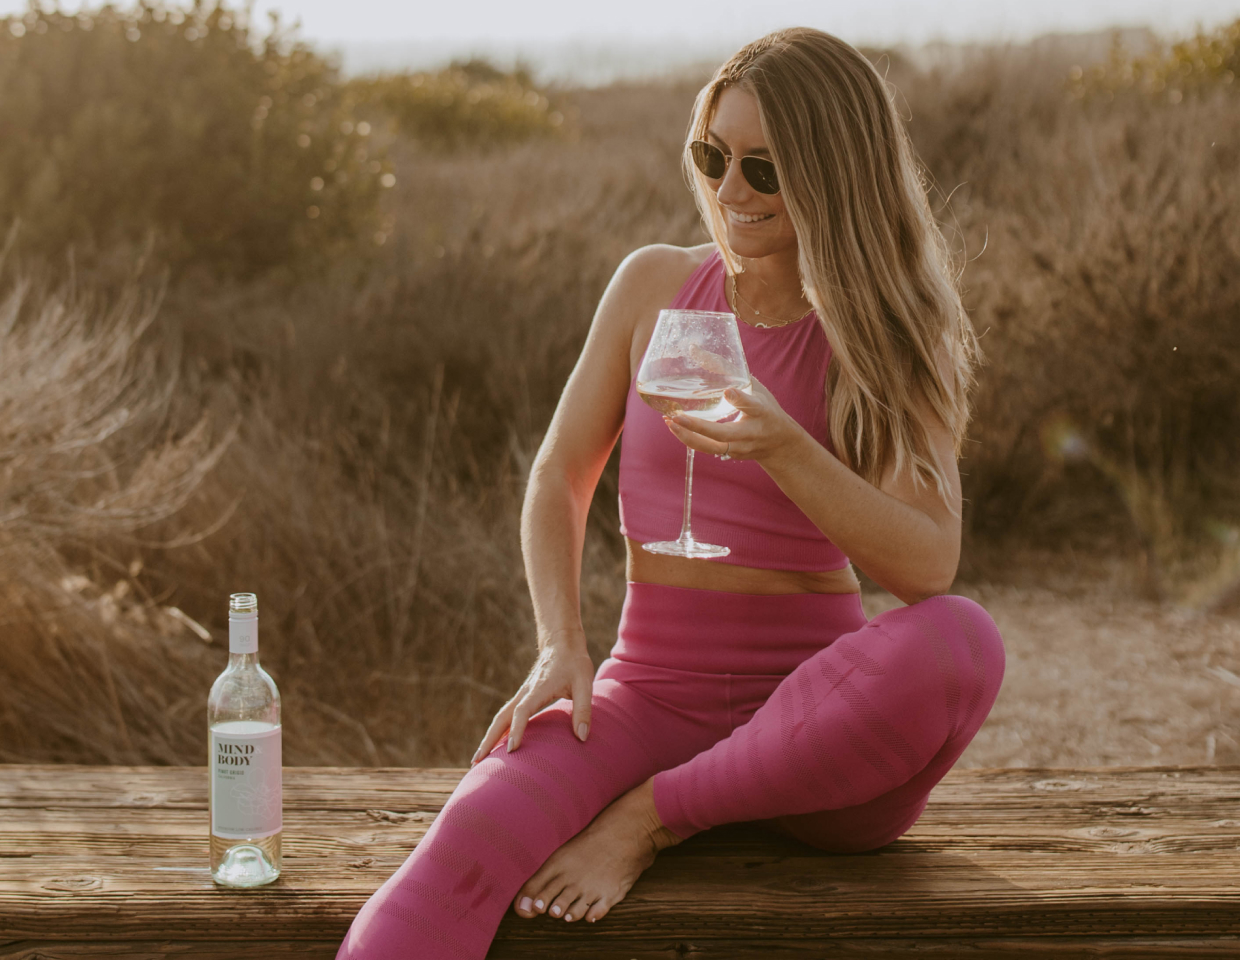 Women sitting on a bench in a beautiful beachy setting wearing a pink athletic outfit holding a glass of Mind & Body Pinot Grigio